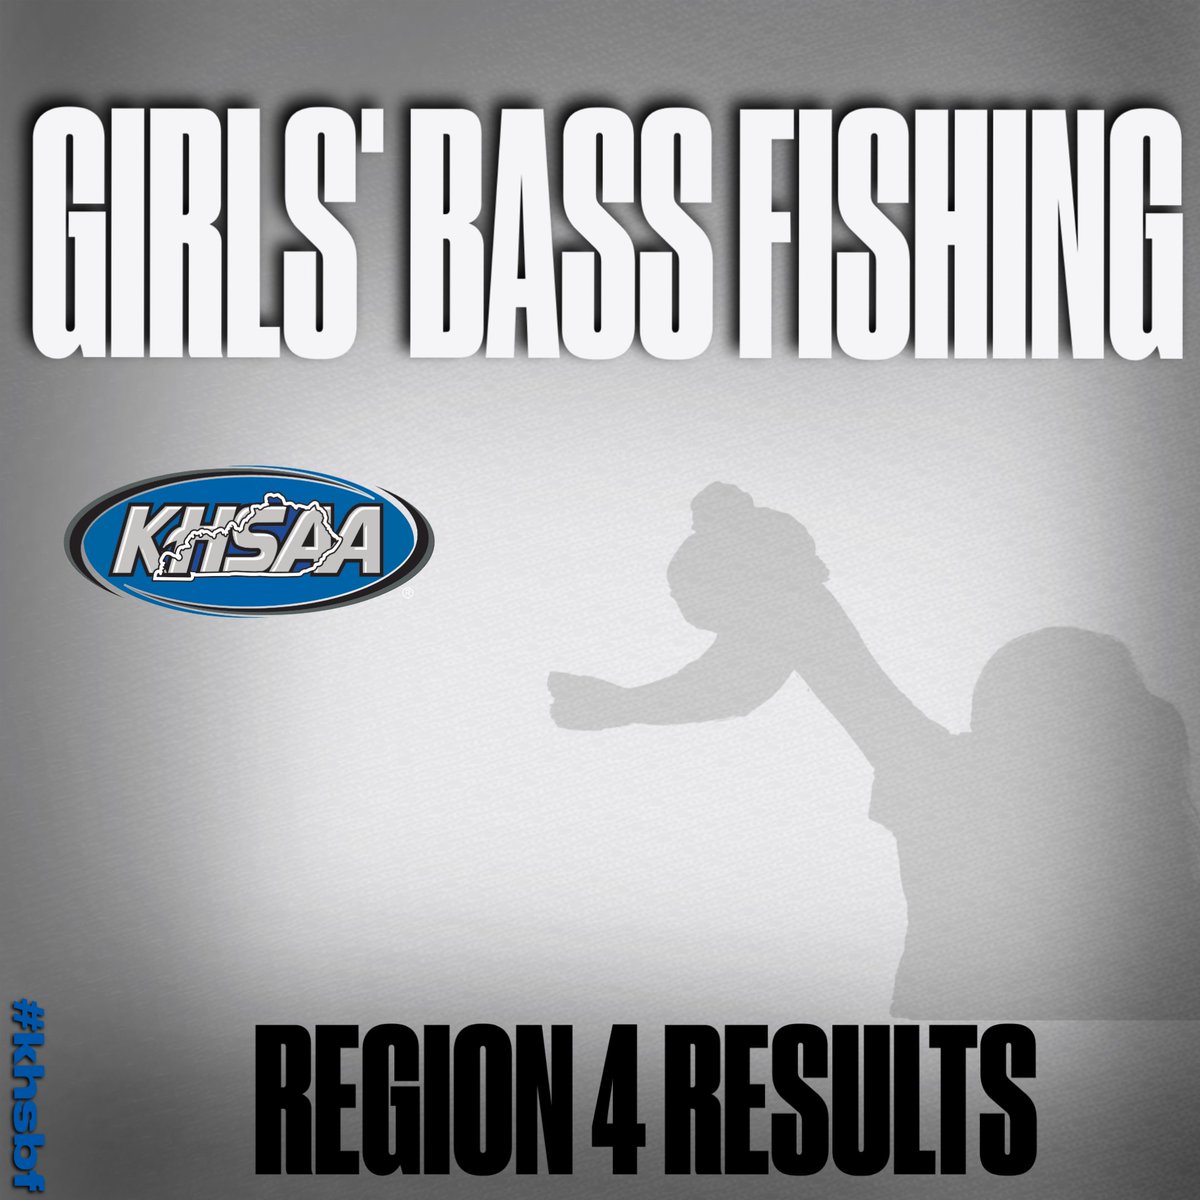 Check out Girls' Bass Fishing Region 4 results: khsaa.org/bassfishing/20…